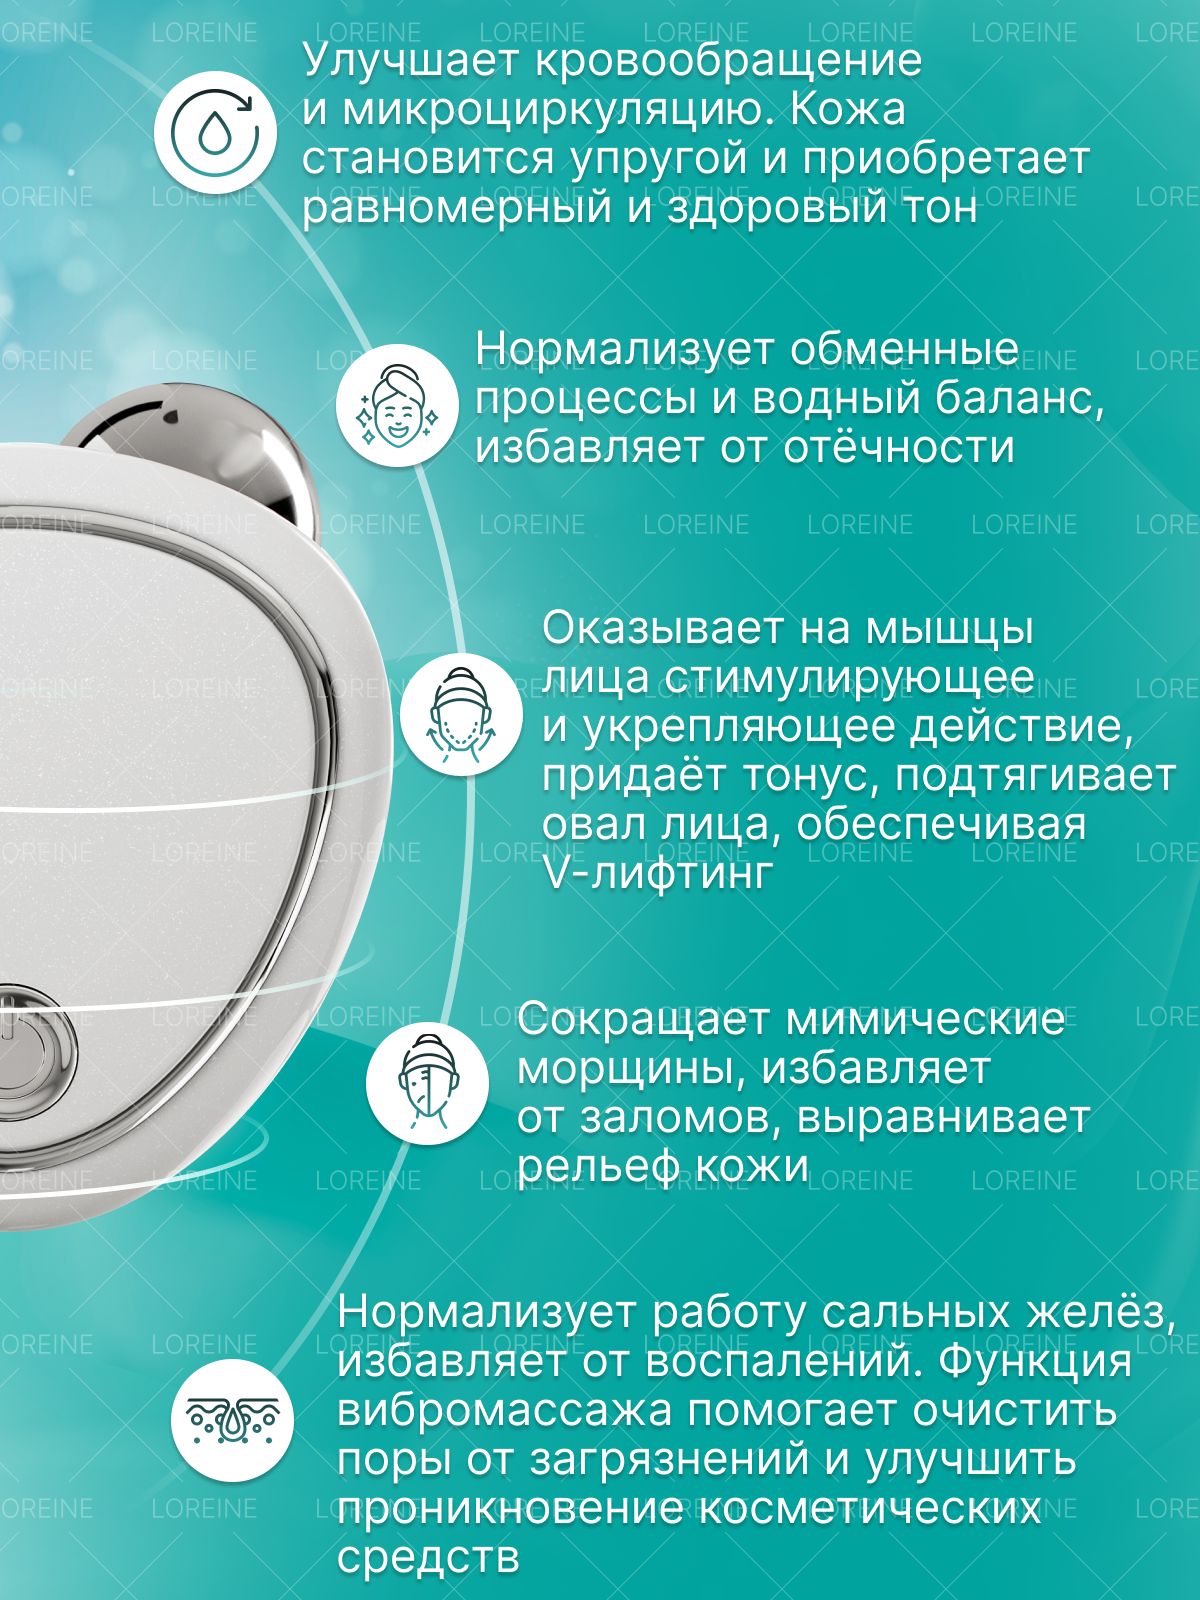 5 Habits Of Highly Effective массажер